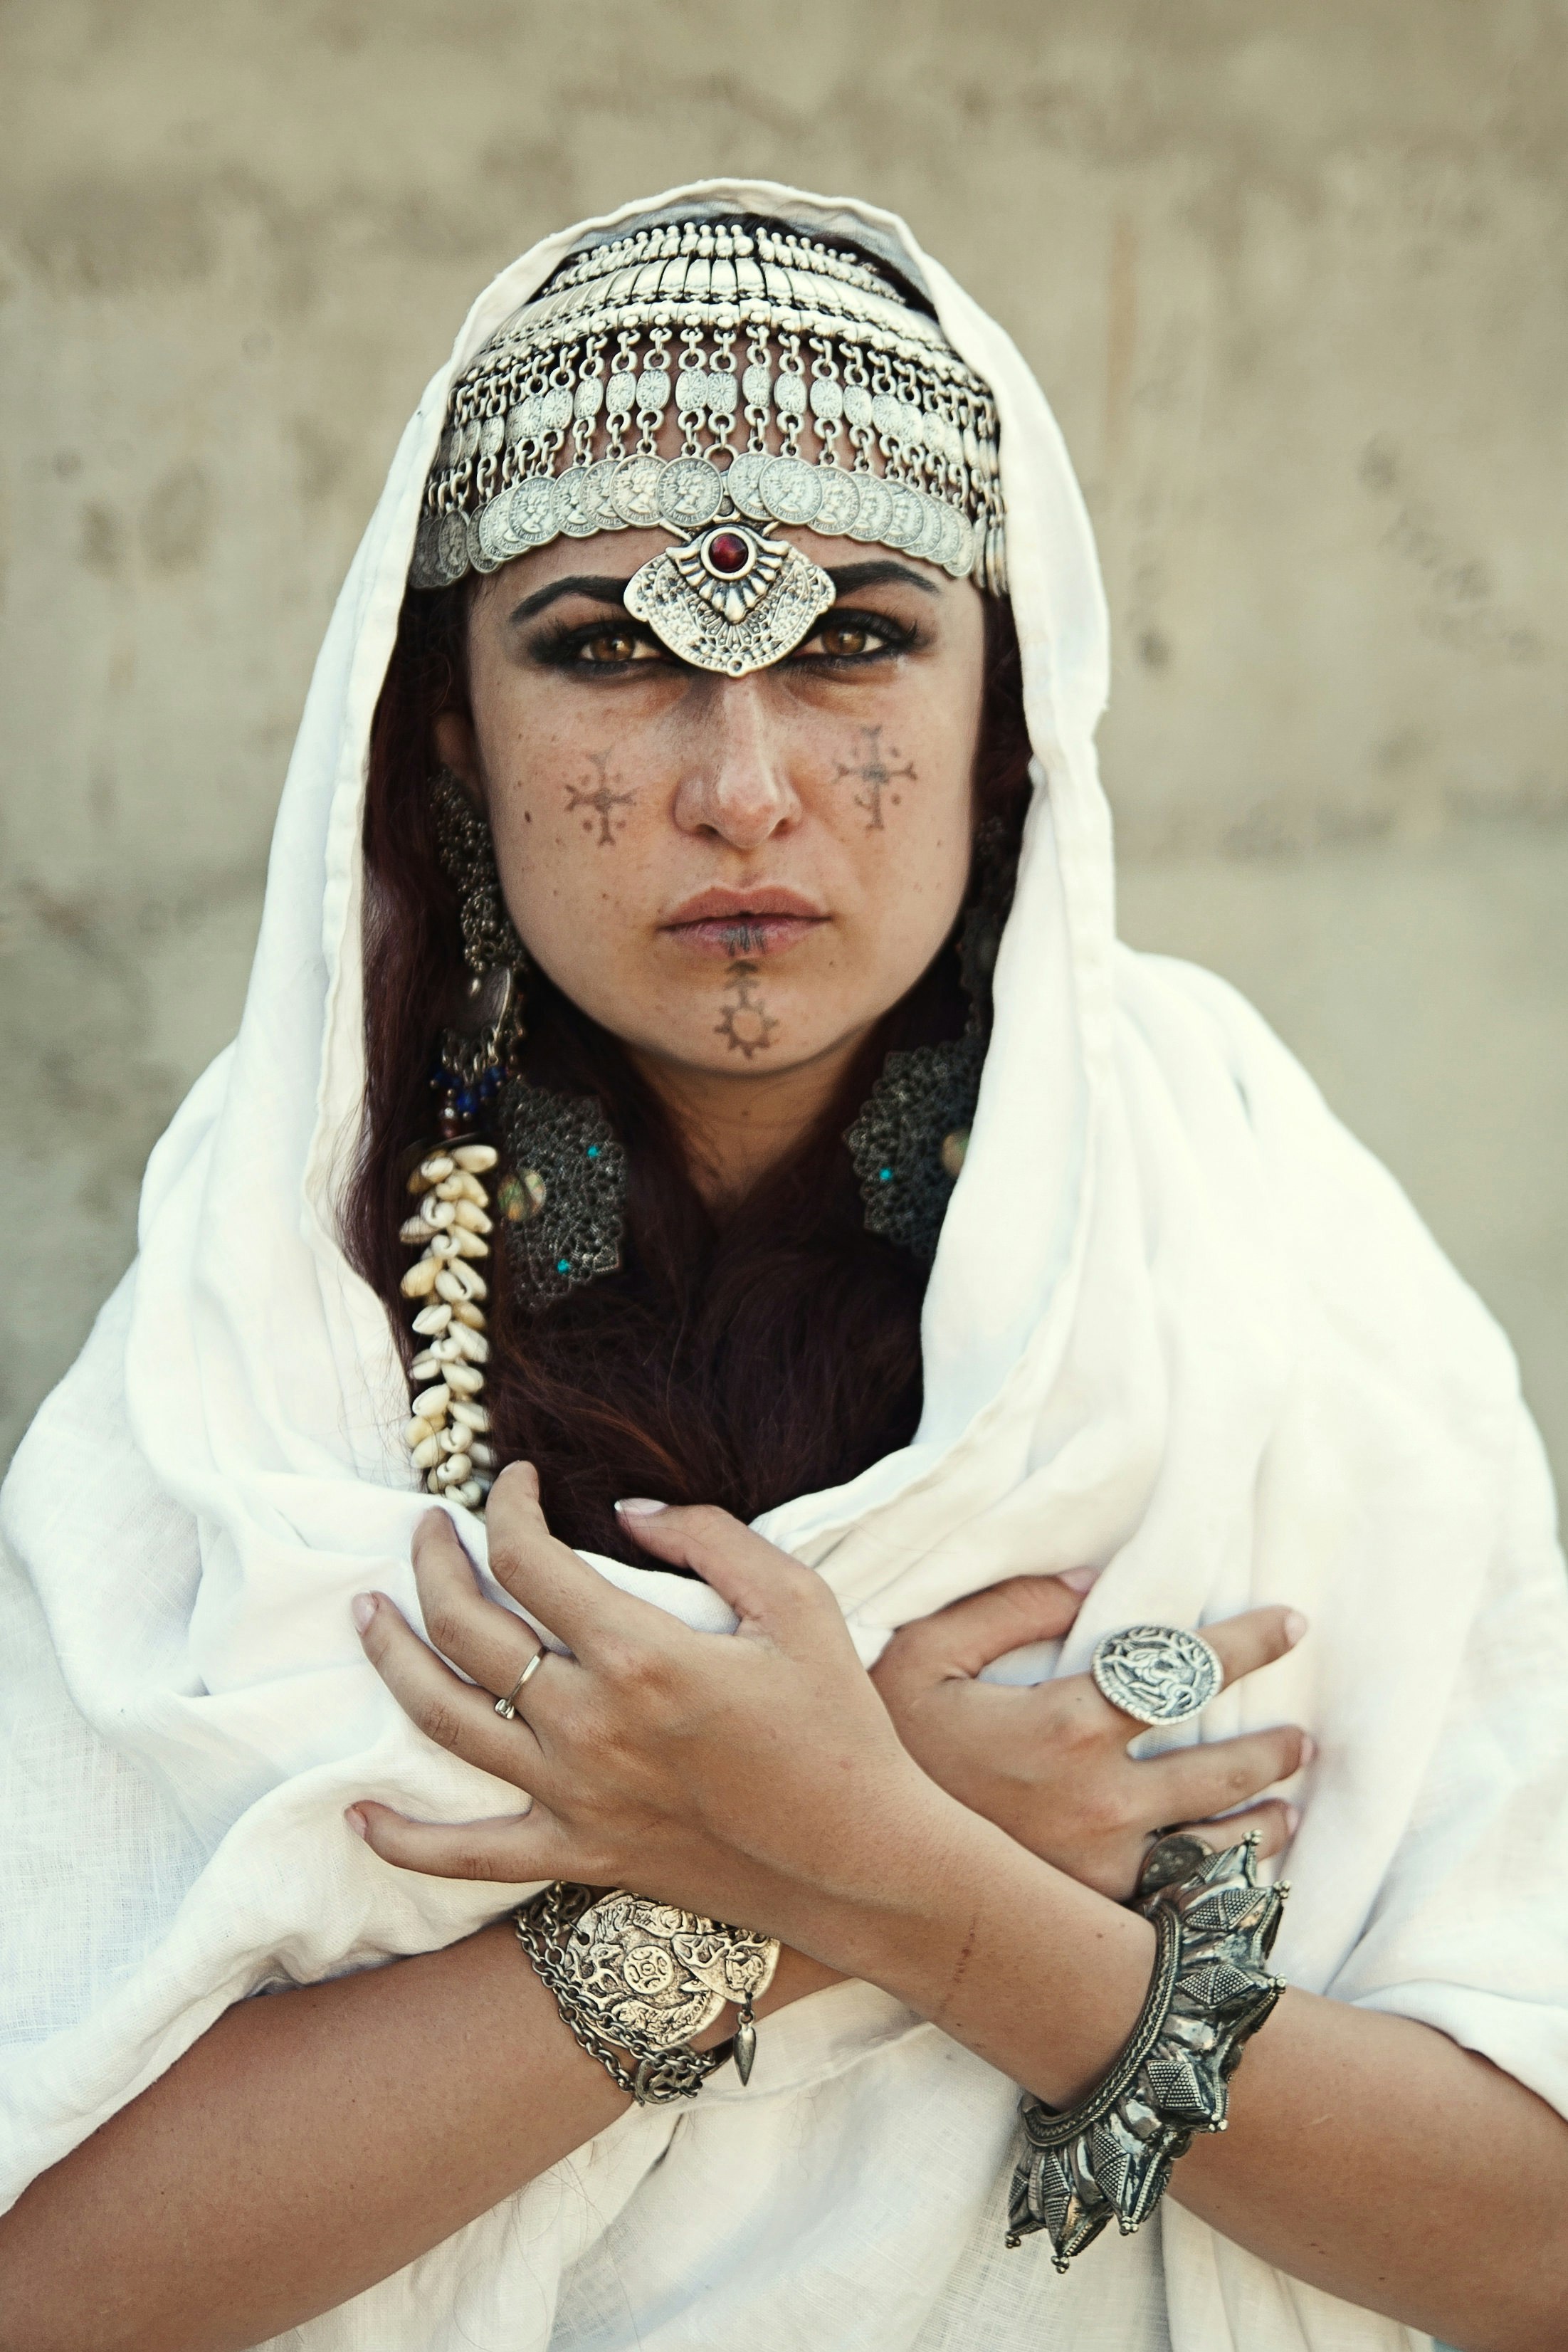 A Berber woman stares into the camera, her cheeks and chin each donning a traditional symbol; she wears a decorative headpiece and large sliver bracelets. Her arms are crossed over her chest and a white shawl covers the top of her head, shoulders and torso.